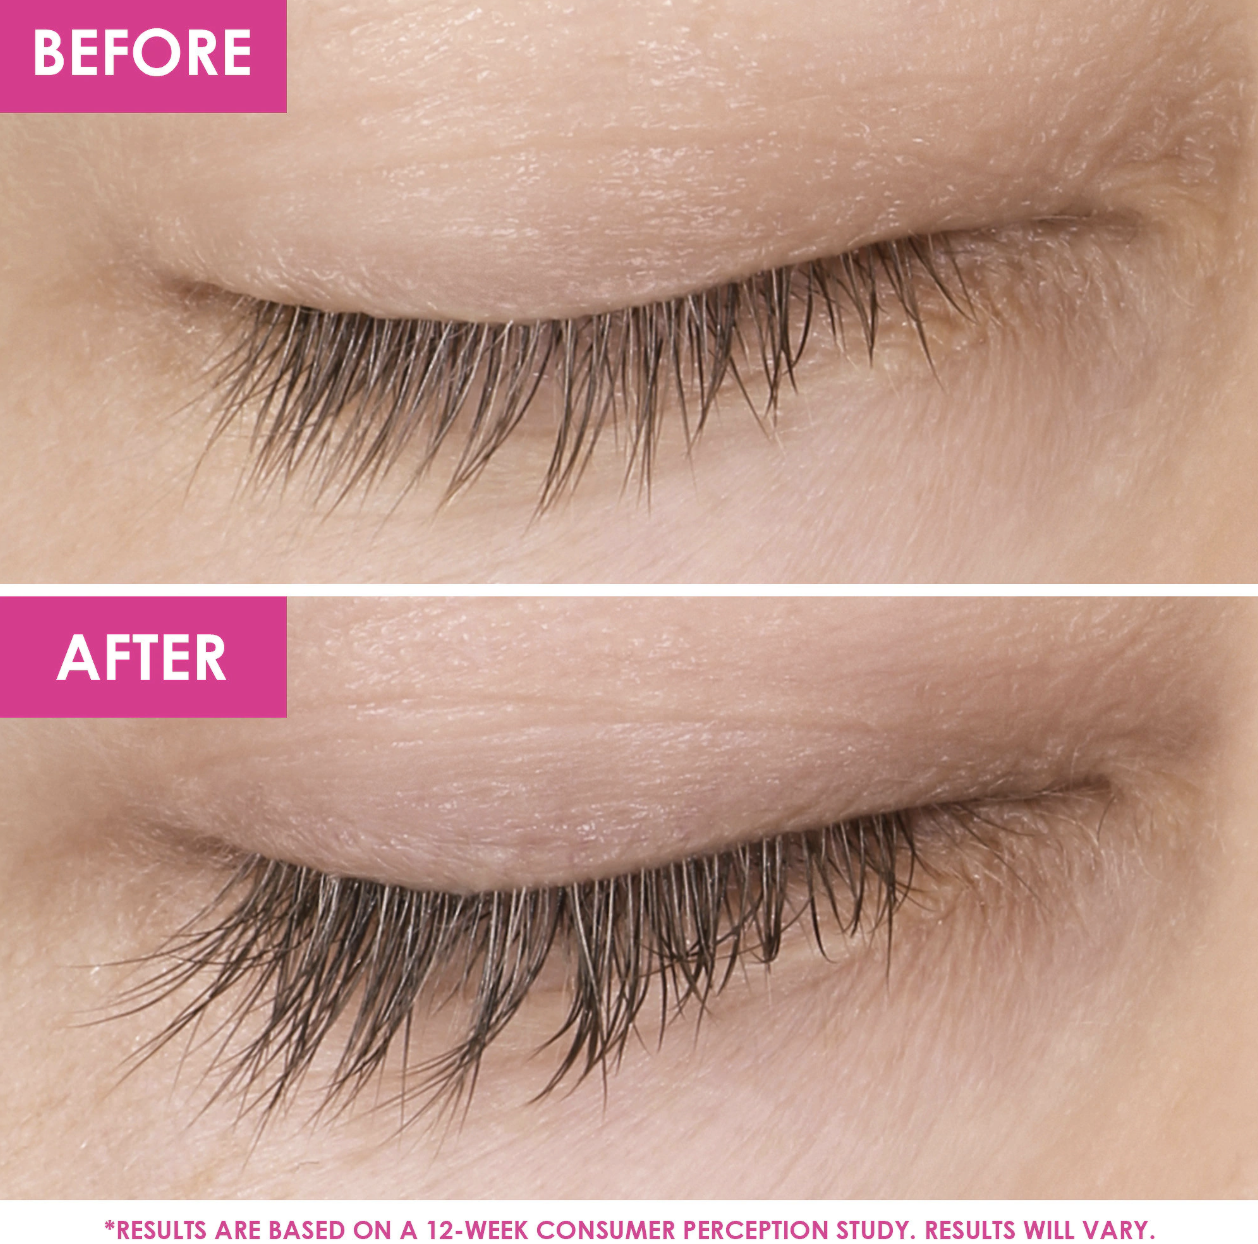 A before-and-after photo showing a close-up of a closed eye with short, slightly thin lashes on top and a close-up of a closed eye with noticeably longer, thicker lashes on the bottom